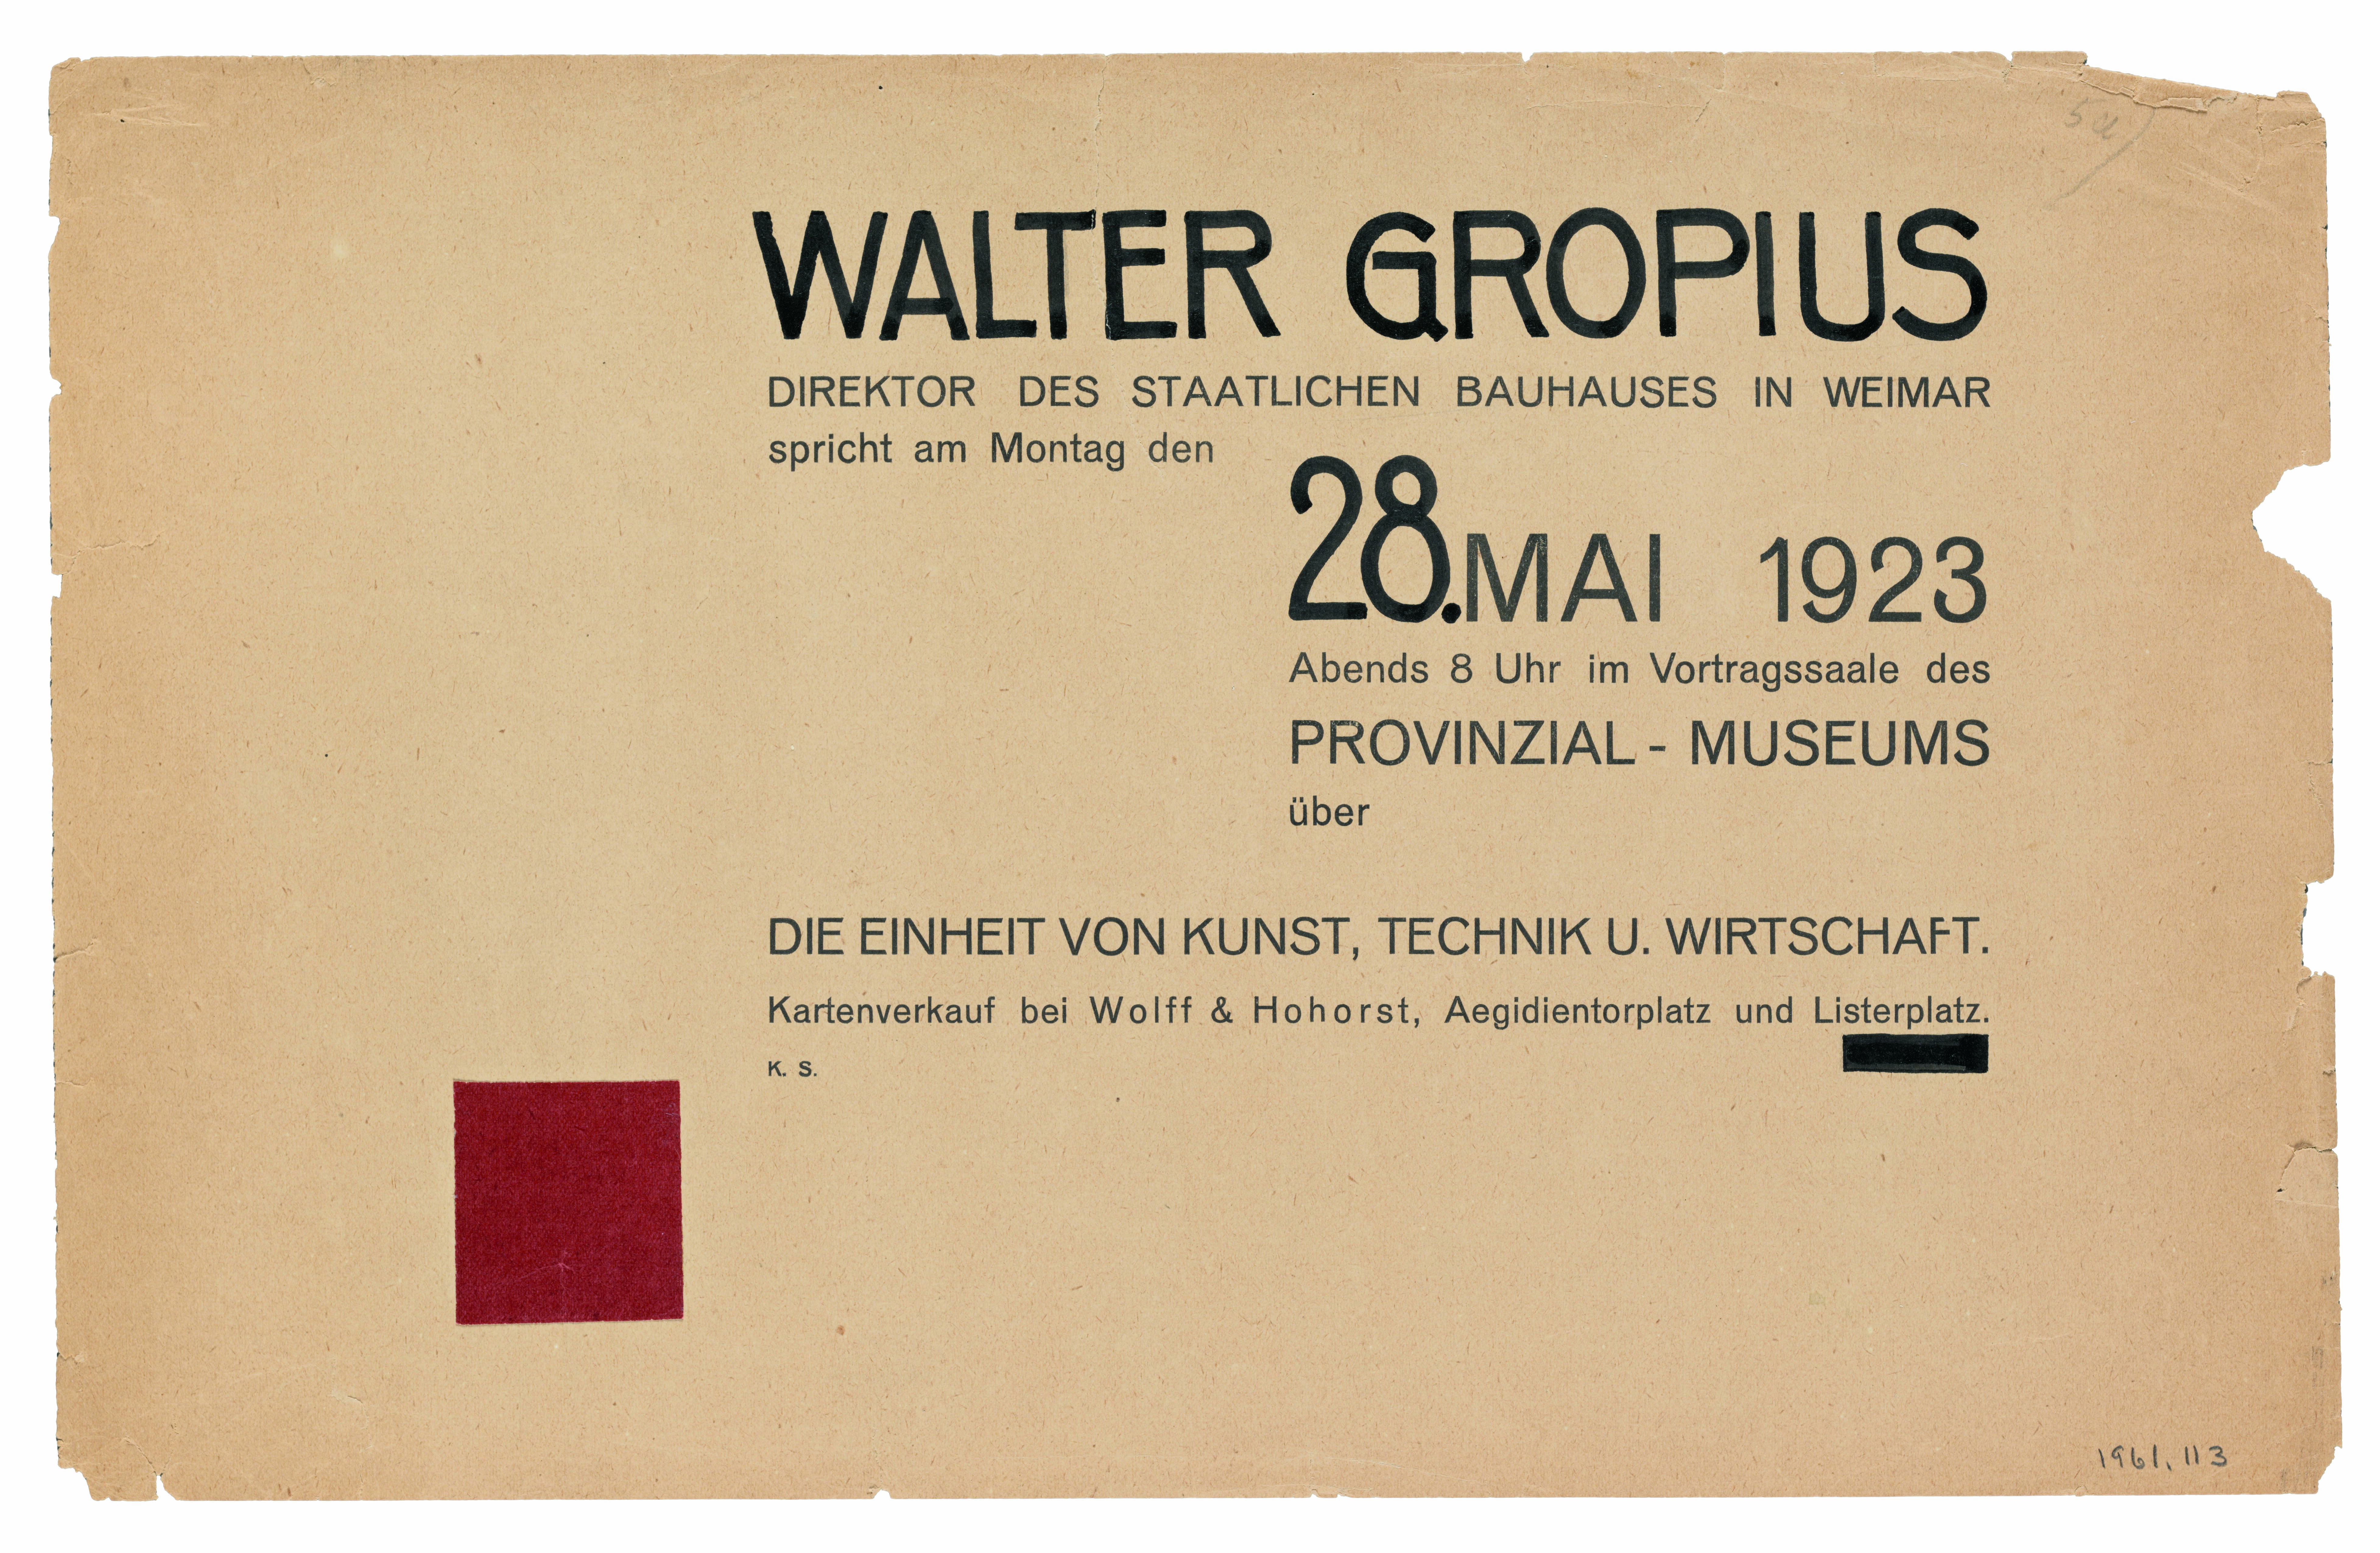 The artists that sustained Walter Gropius